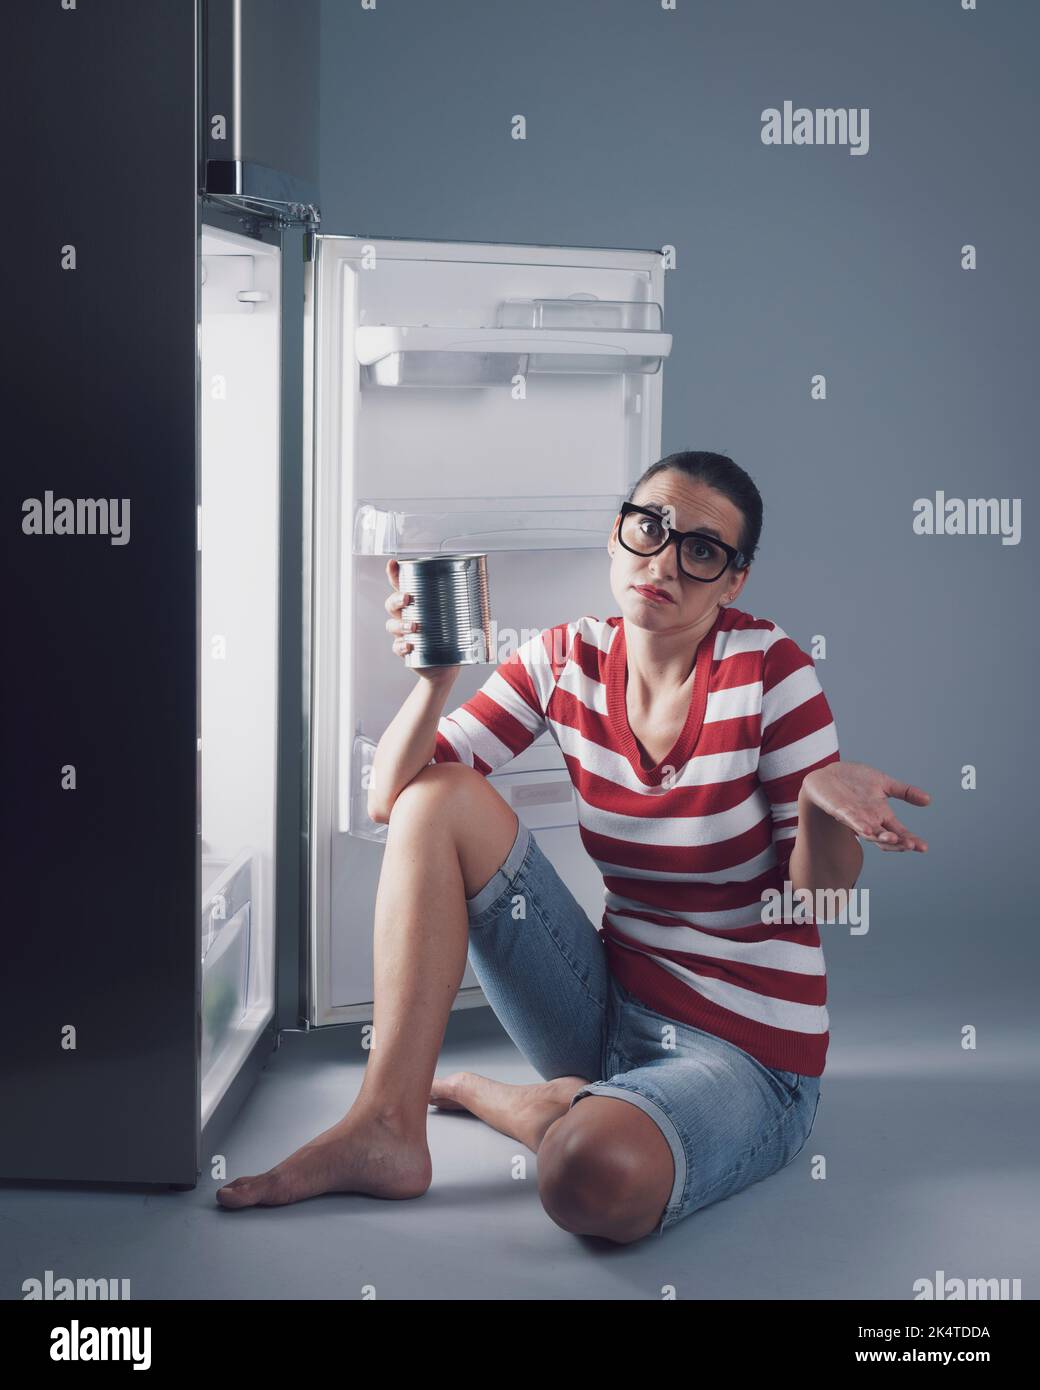 Sad hungry woman standing next to a open fridge, she is holding canned food Stock Photo